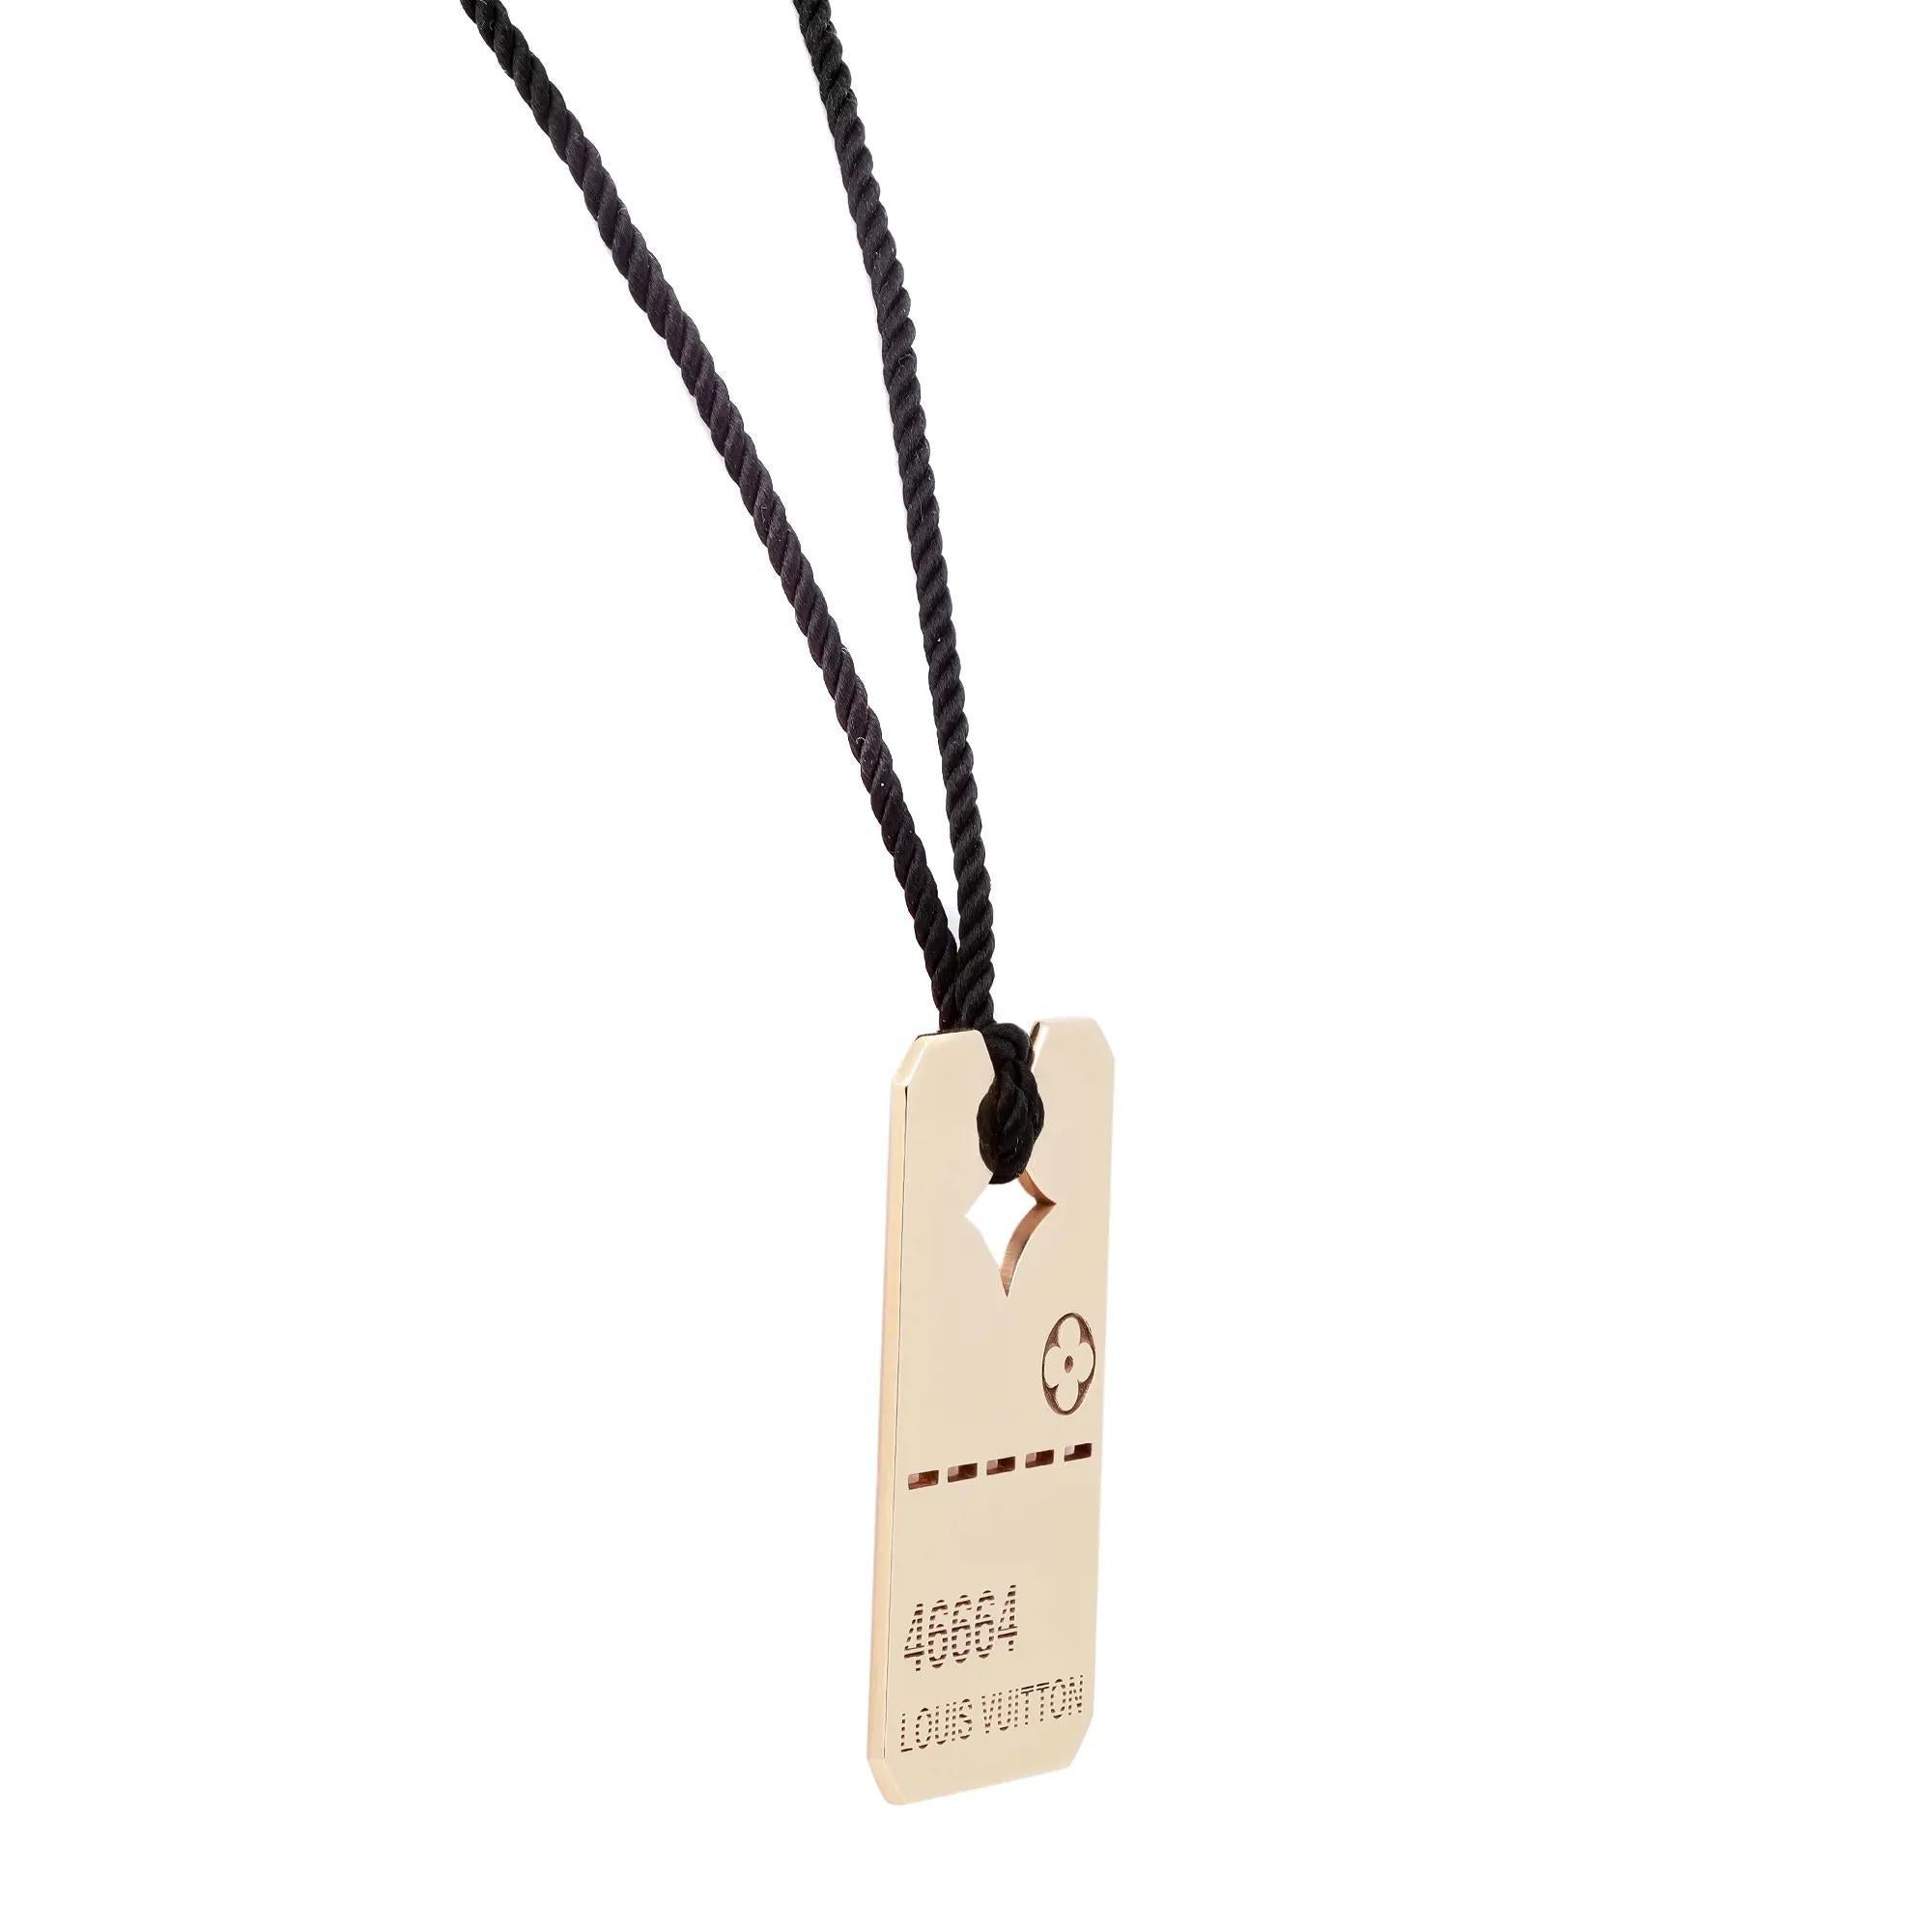 Bold and luxurious dog tag style pendant necklace from Louis Vuitton. Crafted in lustrous 18K yellow gold with rope thread. This piece is both cute and rebellious, with the popular floral icon, 46664 number and a prominent 